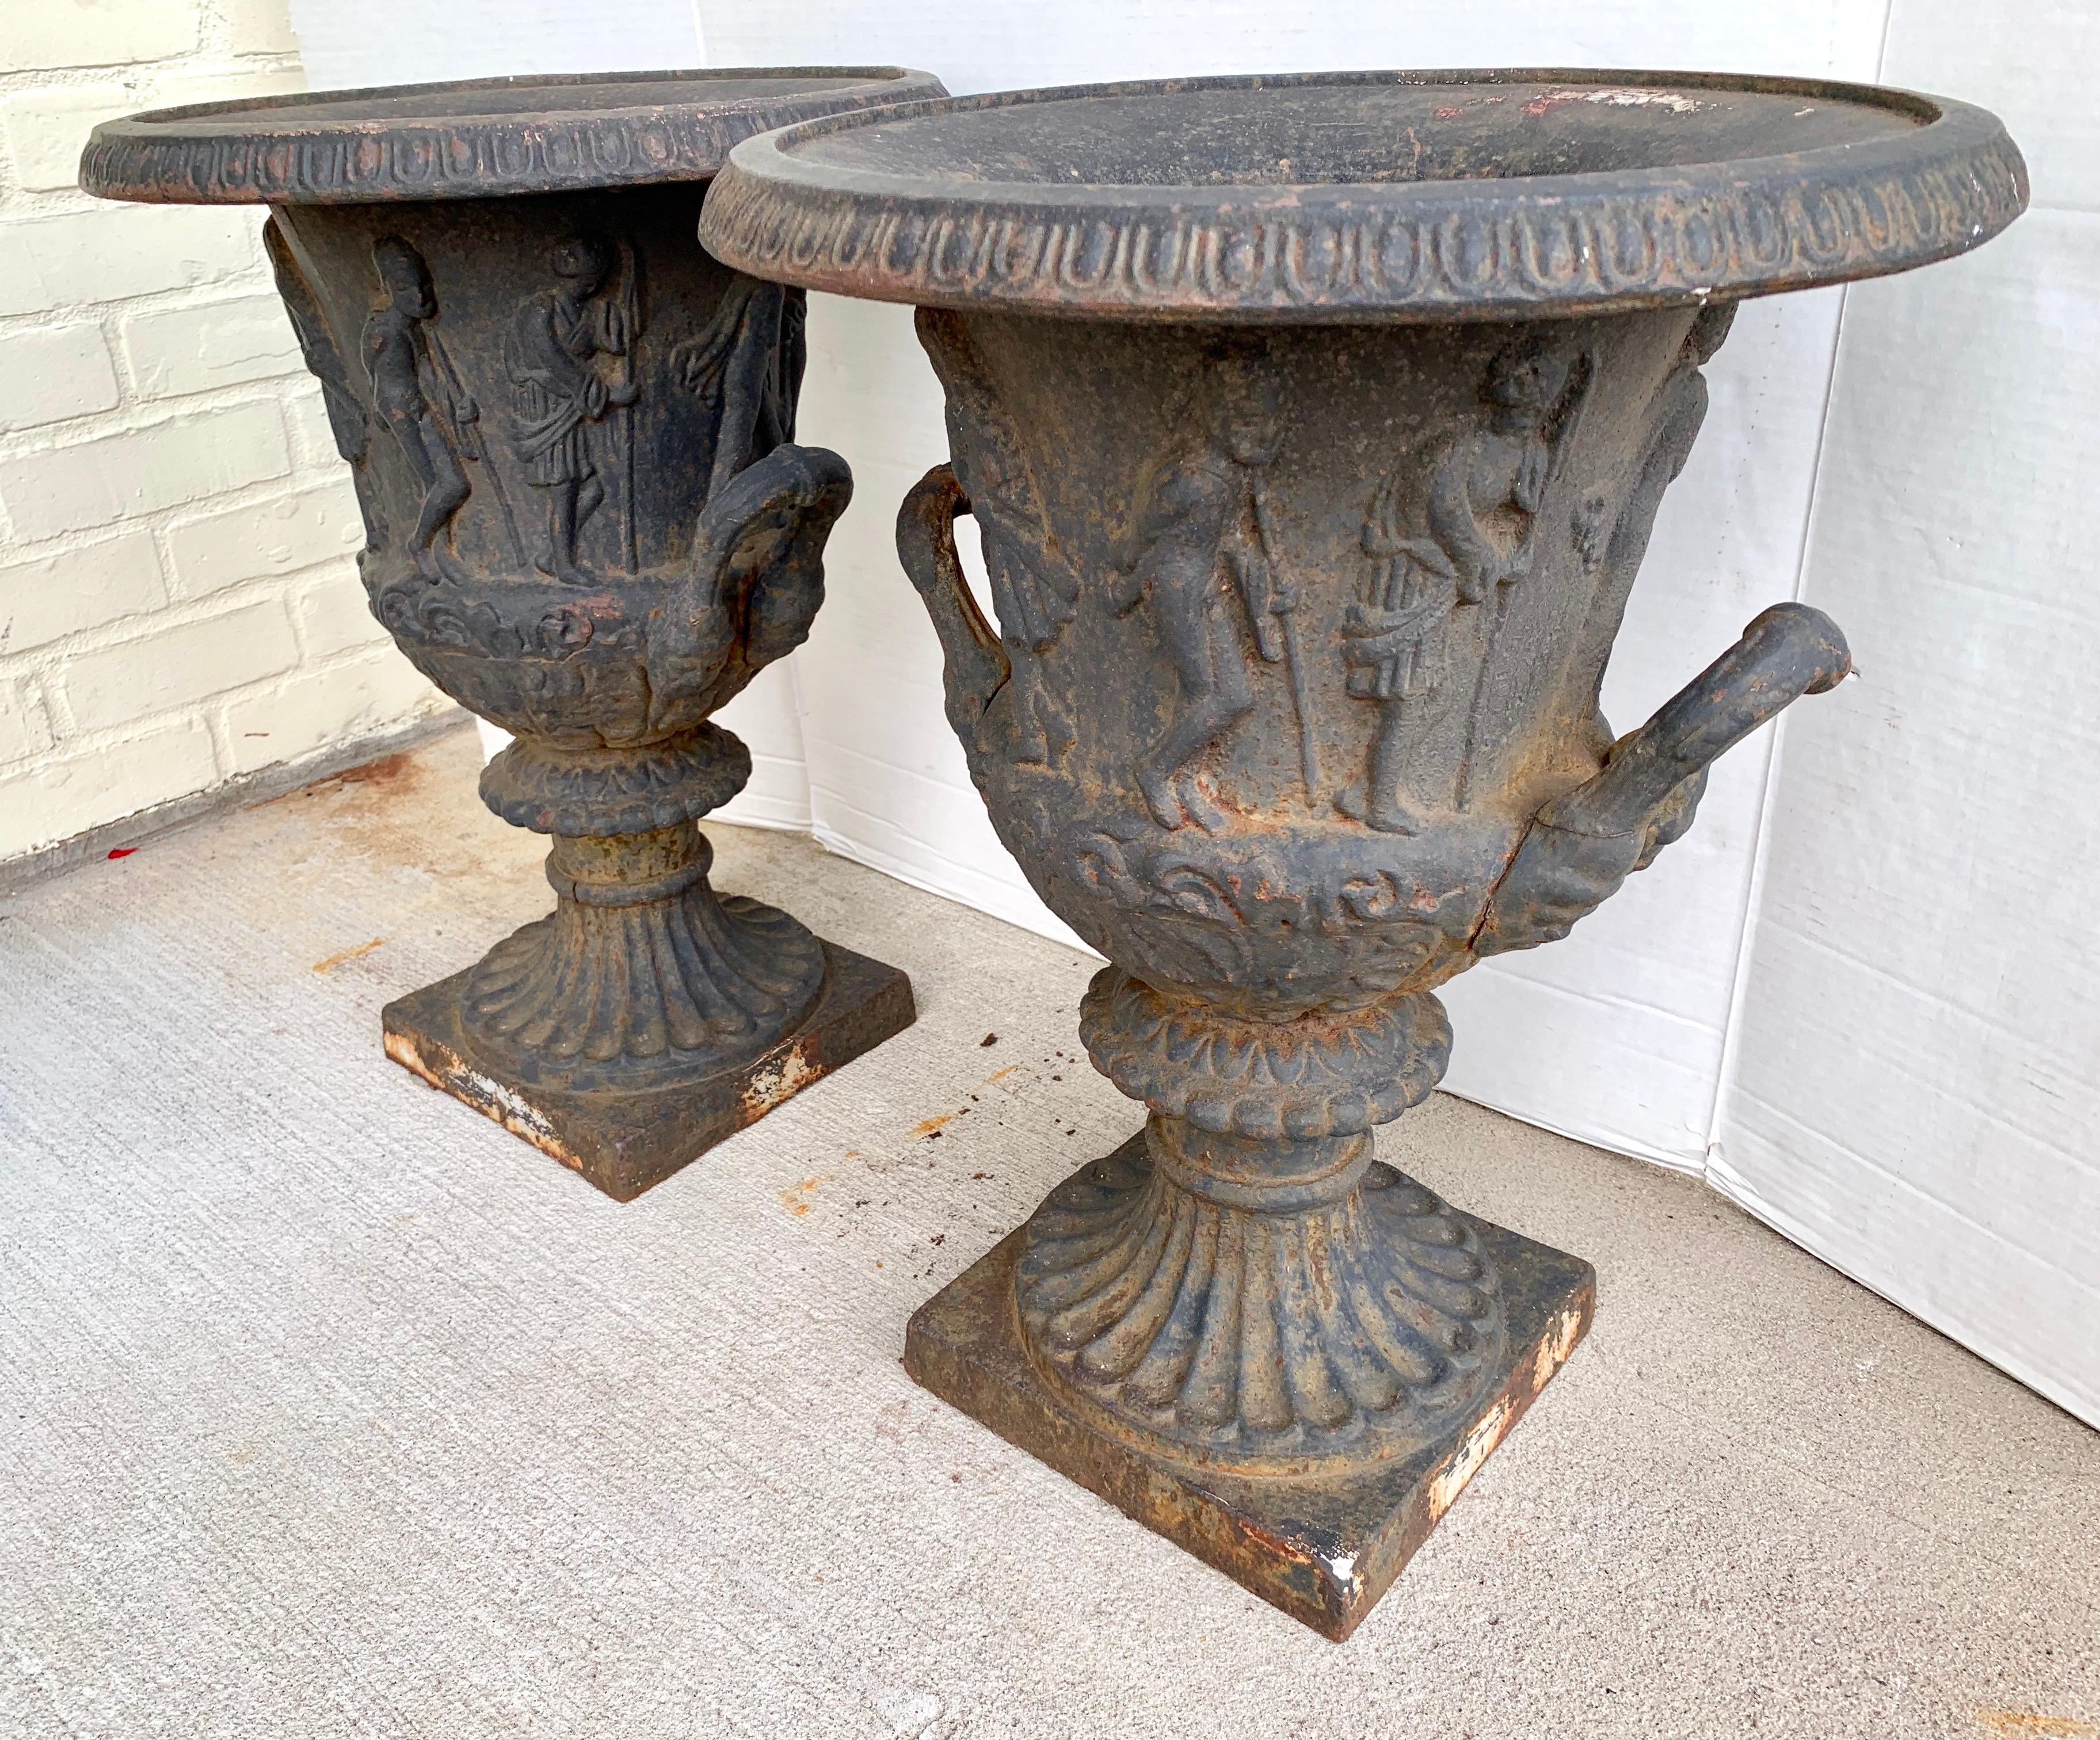 Pair of 19th century neoclassical heavy cast iron urns with an embossed Greco Roman figural motif all around.